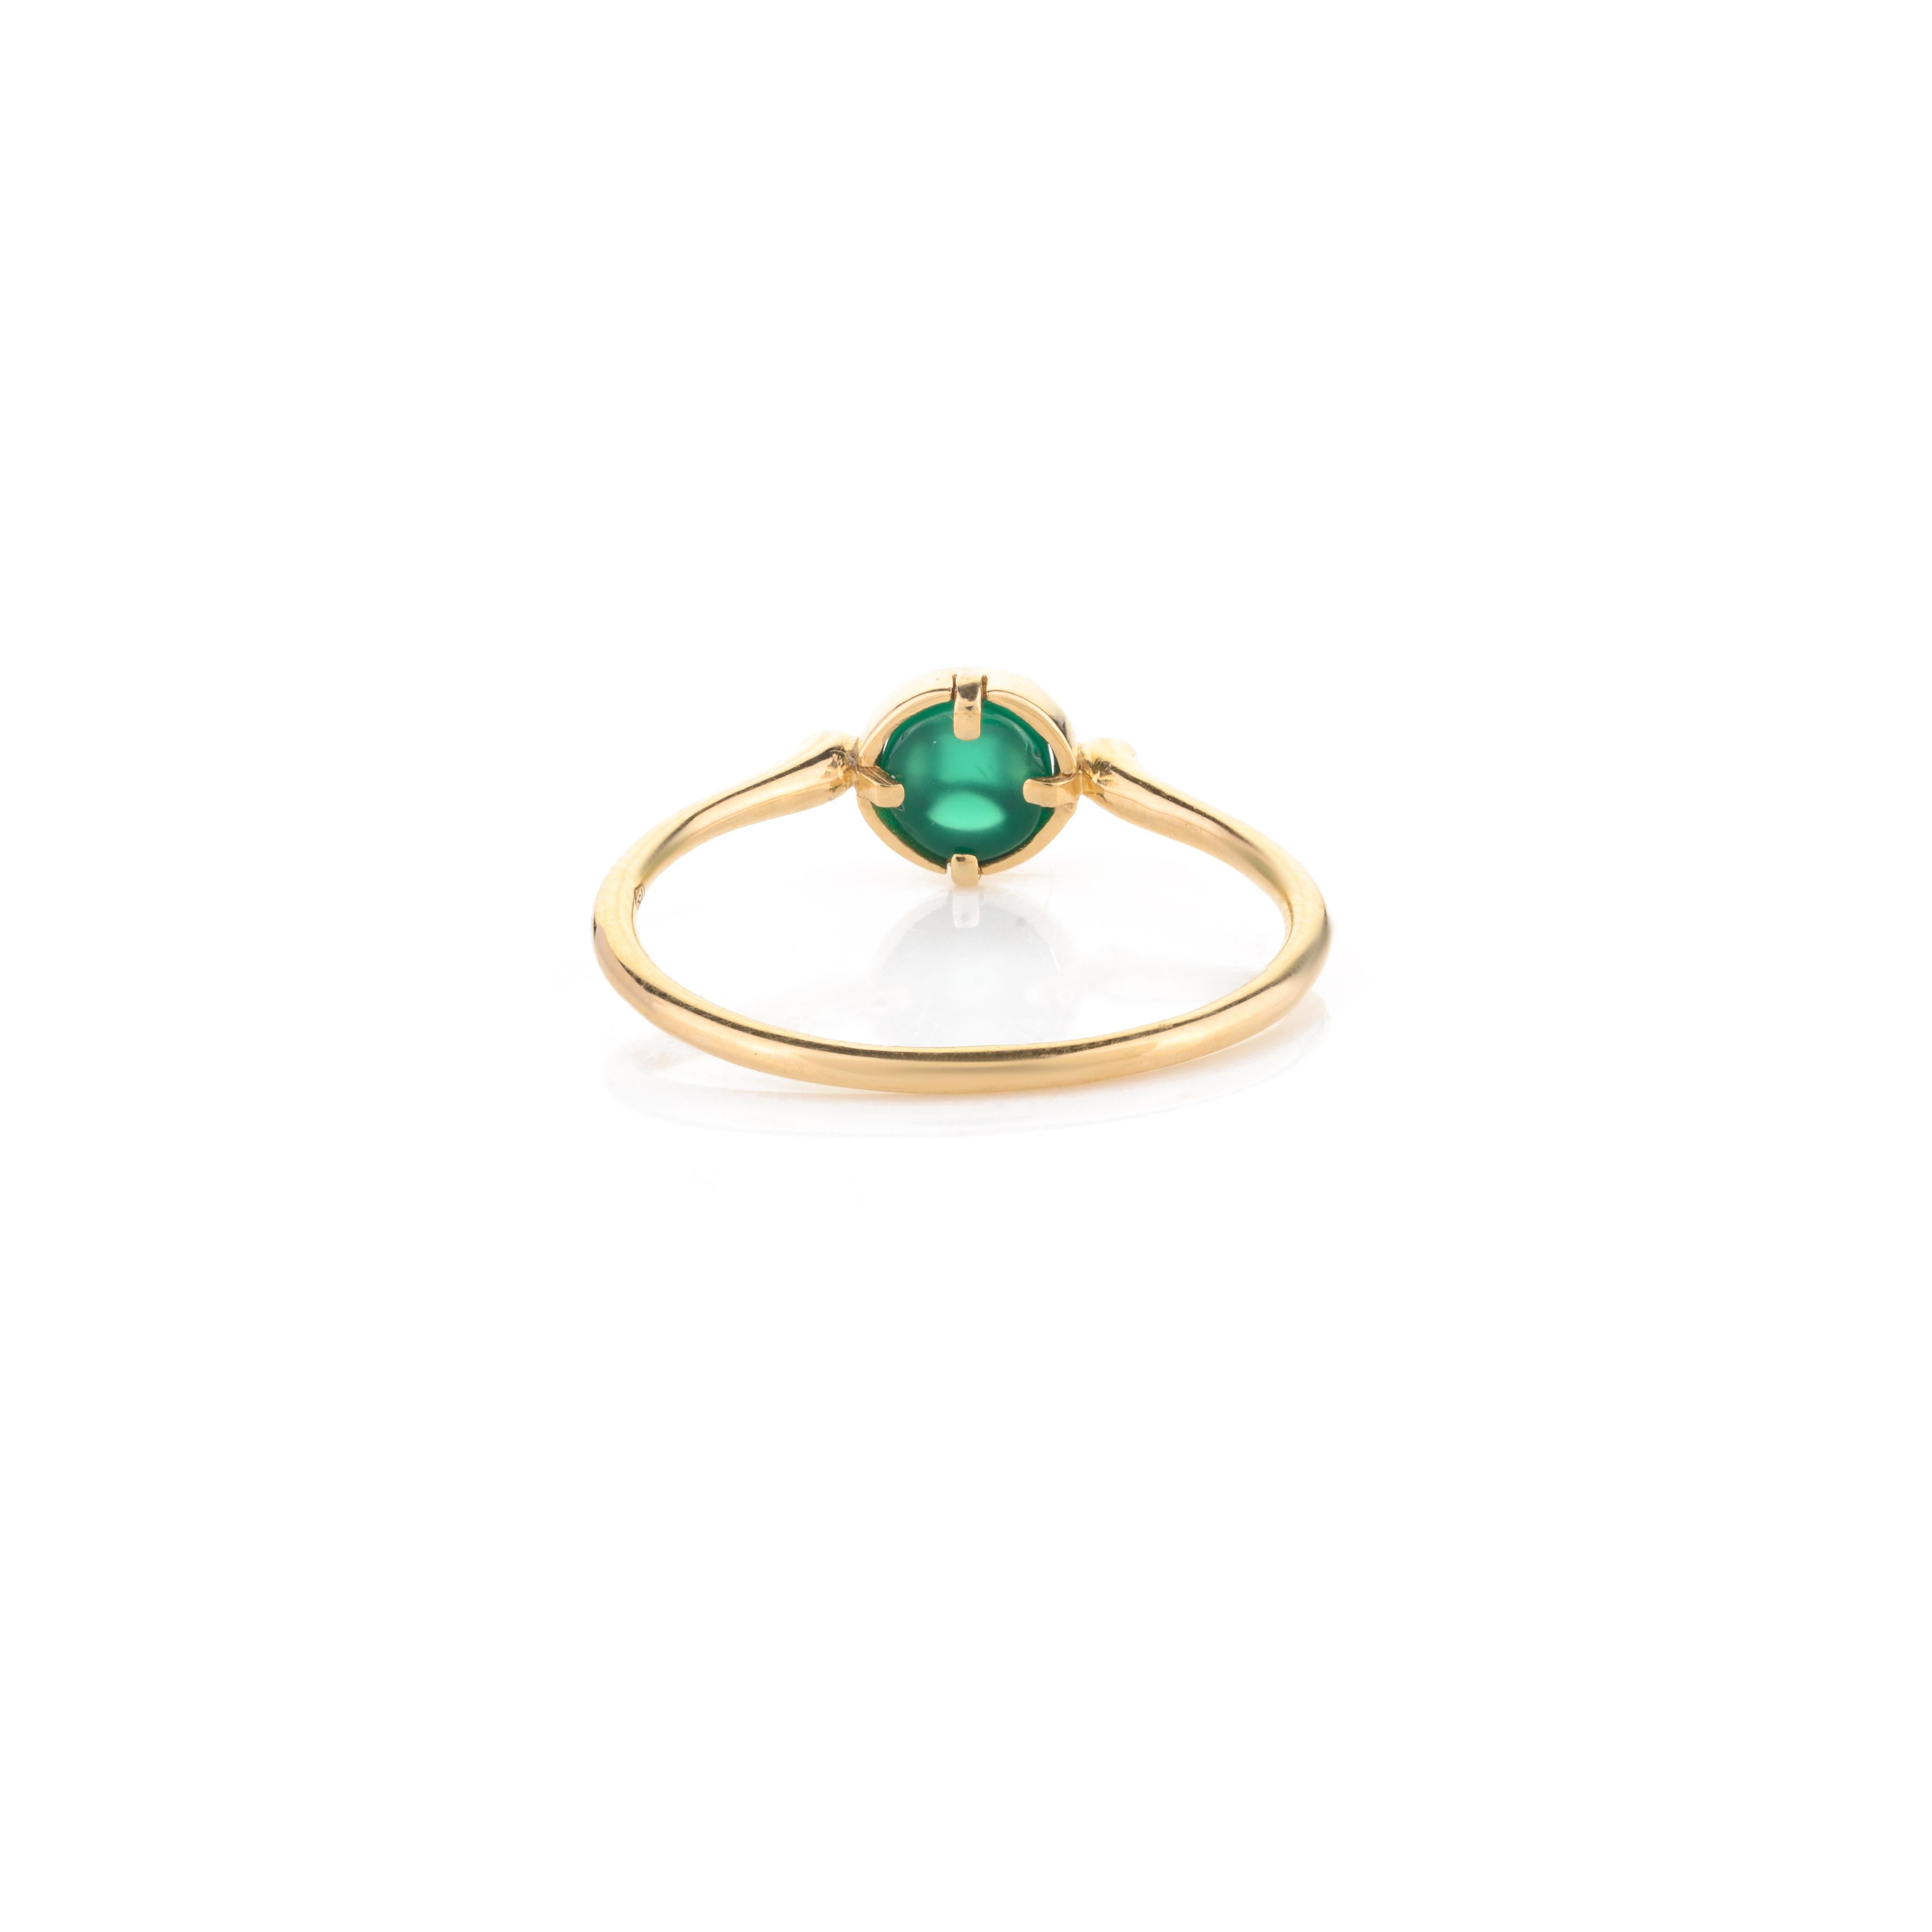 For Sale:  Modern 18k Solid Yellow Gold Green Onyx Minimalist Everyday Ring for Her 5